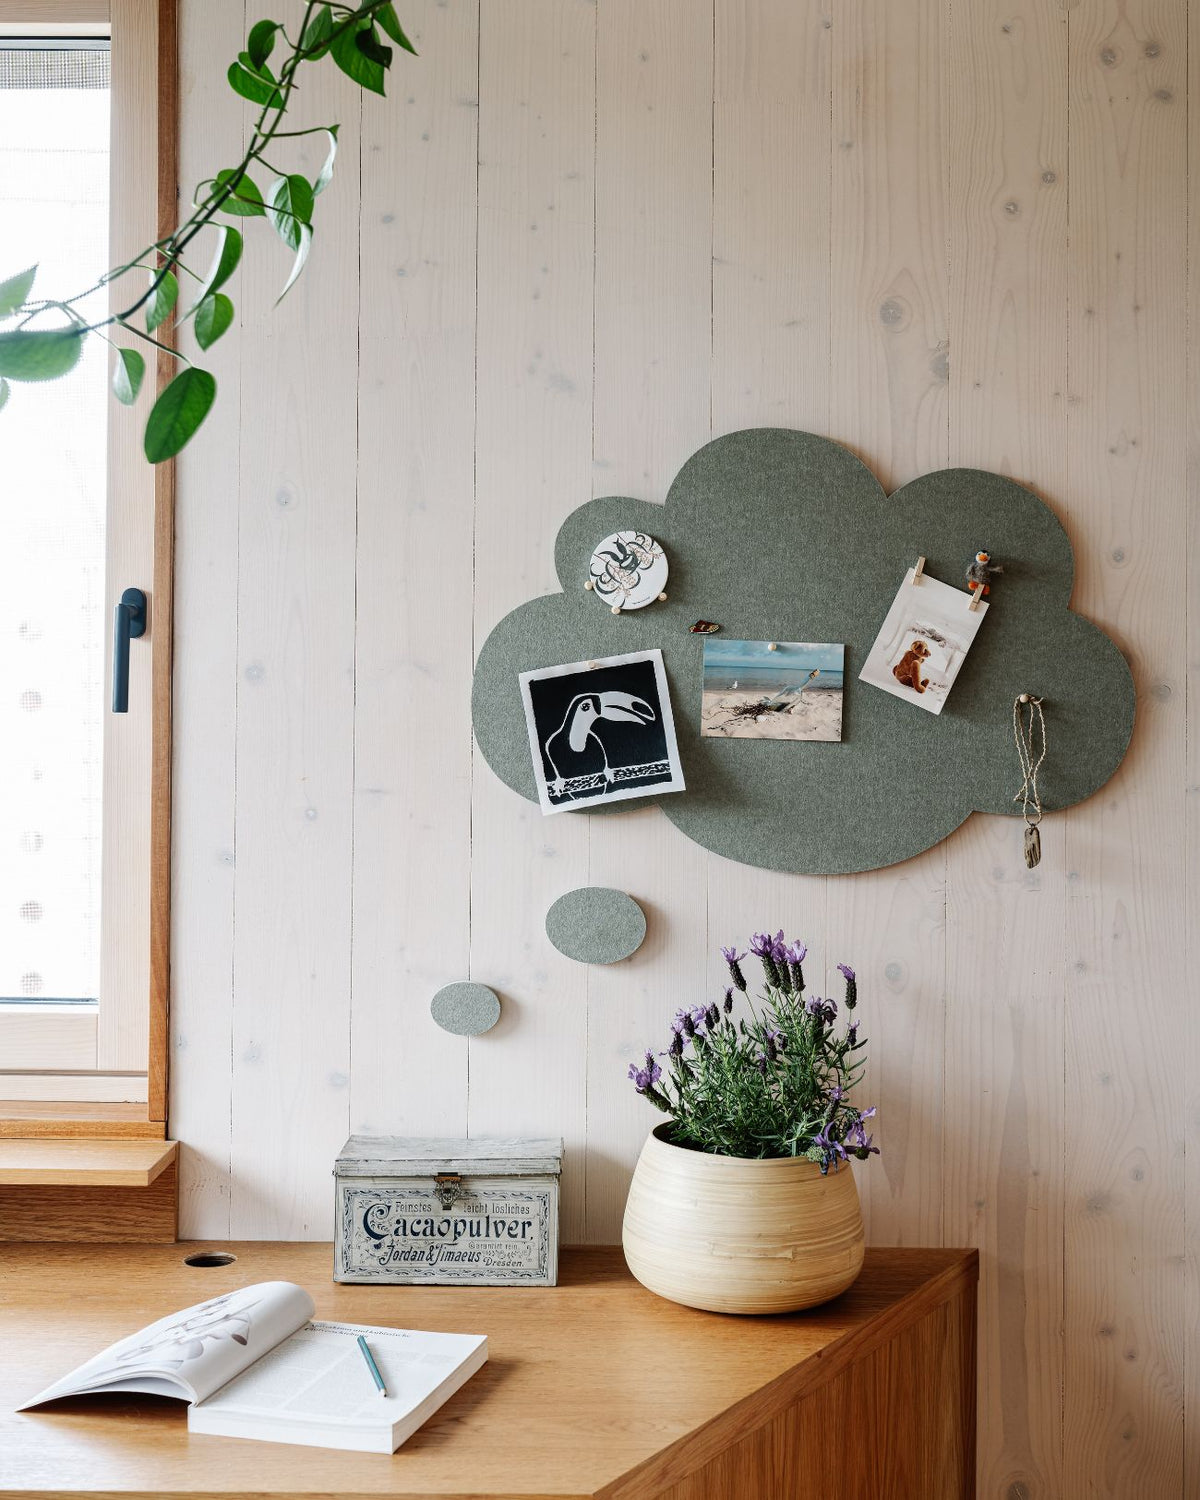 Our Thought Bubble Pinboards have a beautiful felt-like appearance, and they are amazing to touch as well as visually appealing in all living spaces. They come with easy peel and stick tabs for your wall, making them ready for pinning straight away. Whether it’s over a desk or simply running down a wall, these pinboards are so versatile for little kids, big kids, and adults alike!